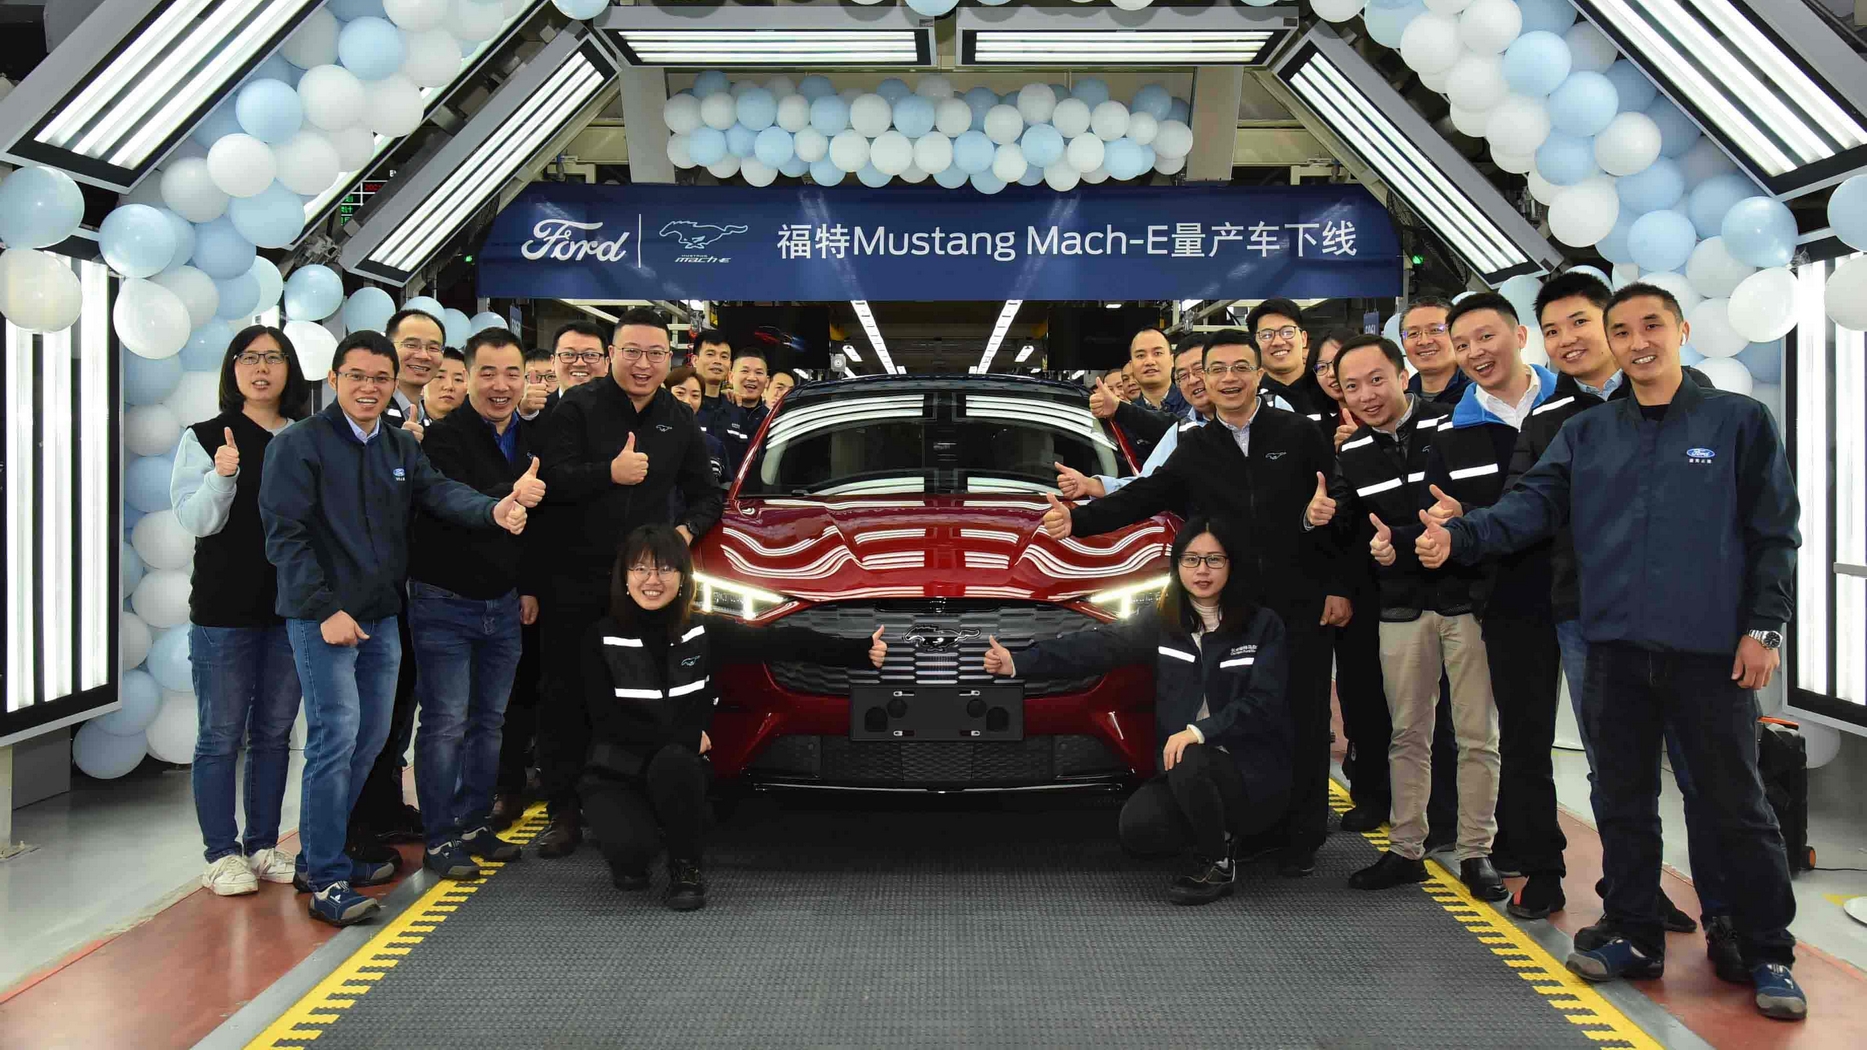 ford-mustang-mach-e-enters-production-in-china-with-byd-batteries-172054_1.jpg